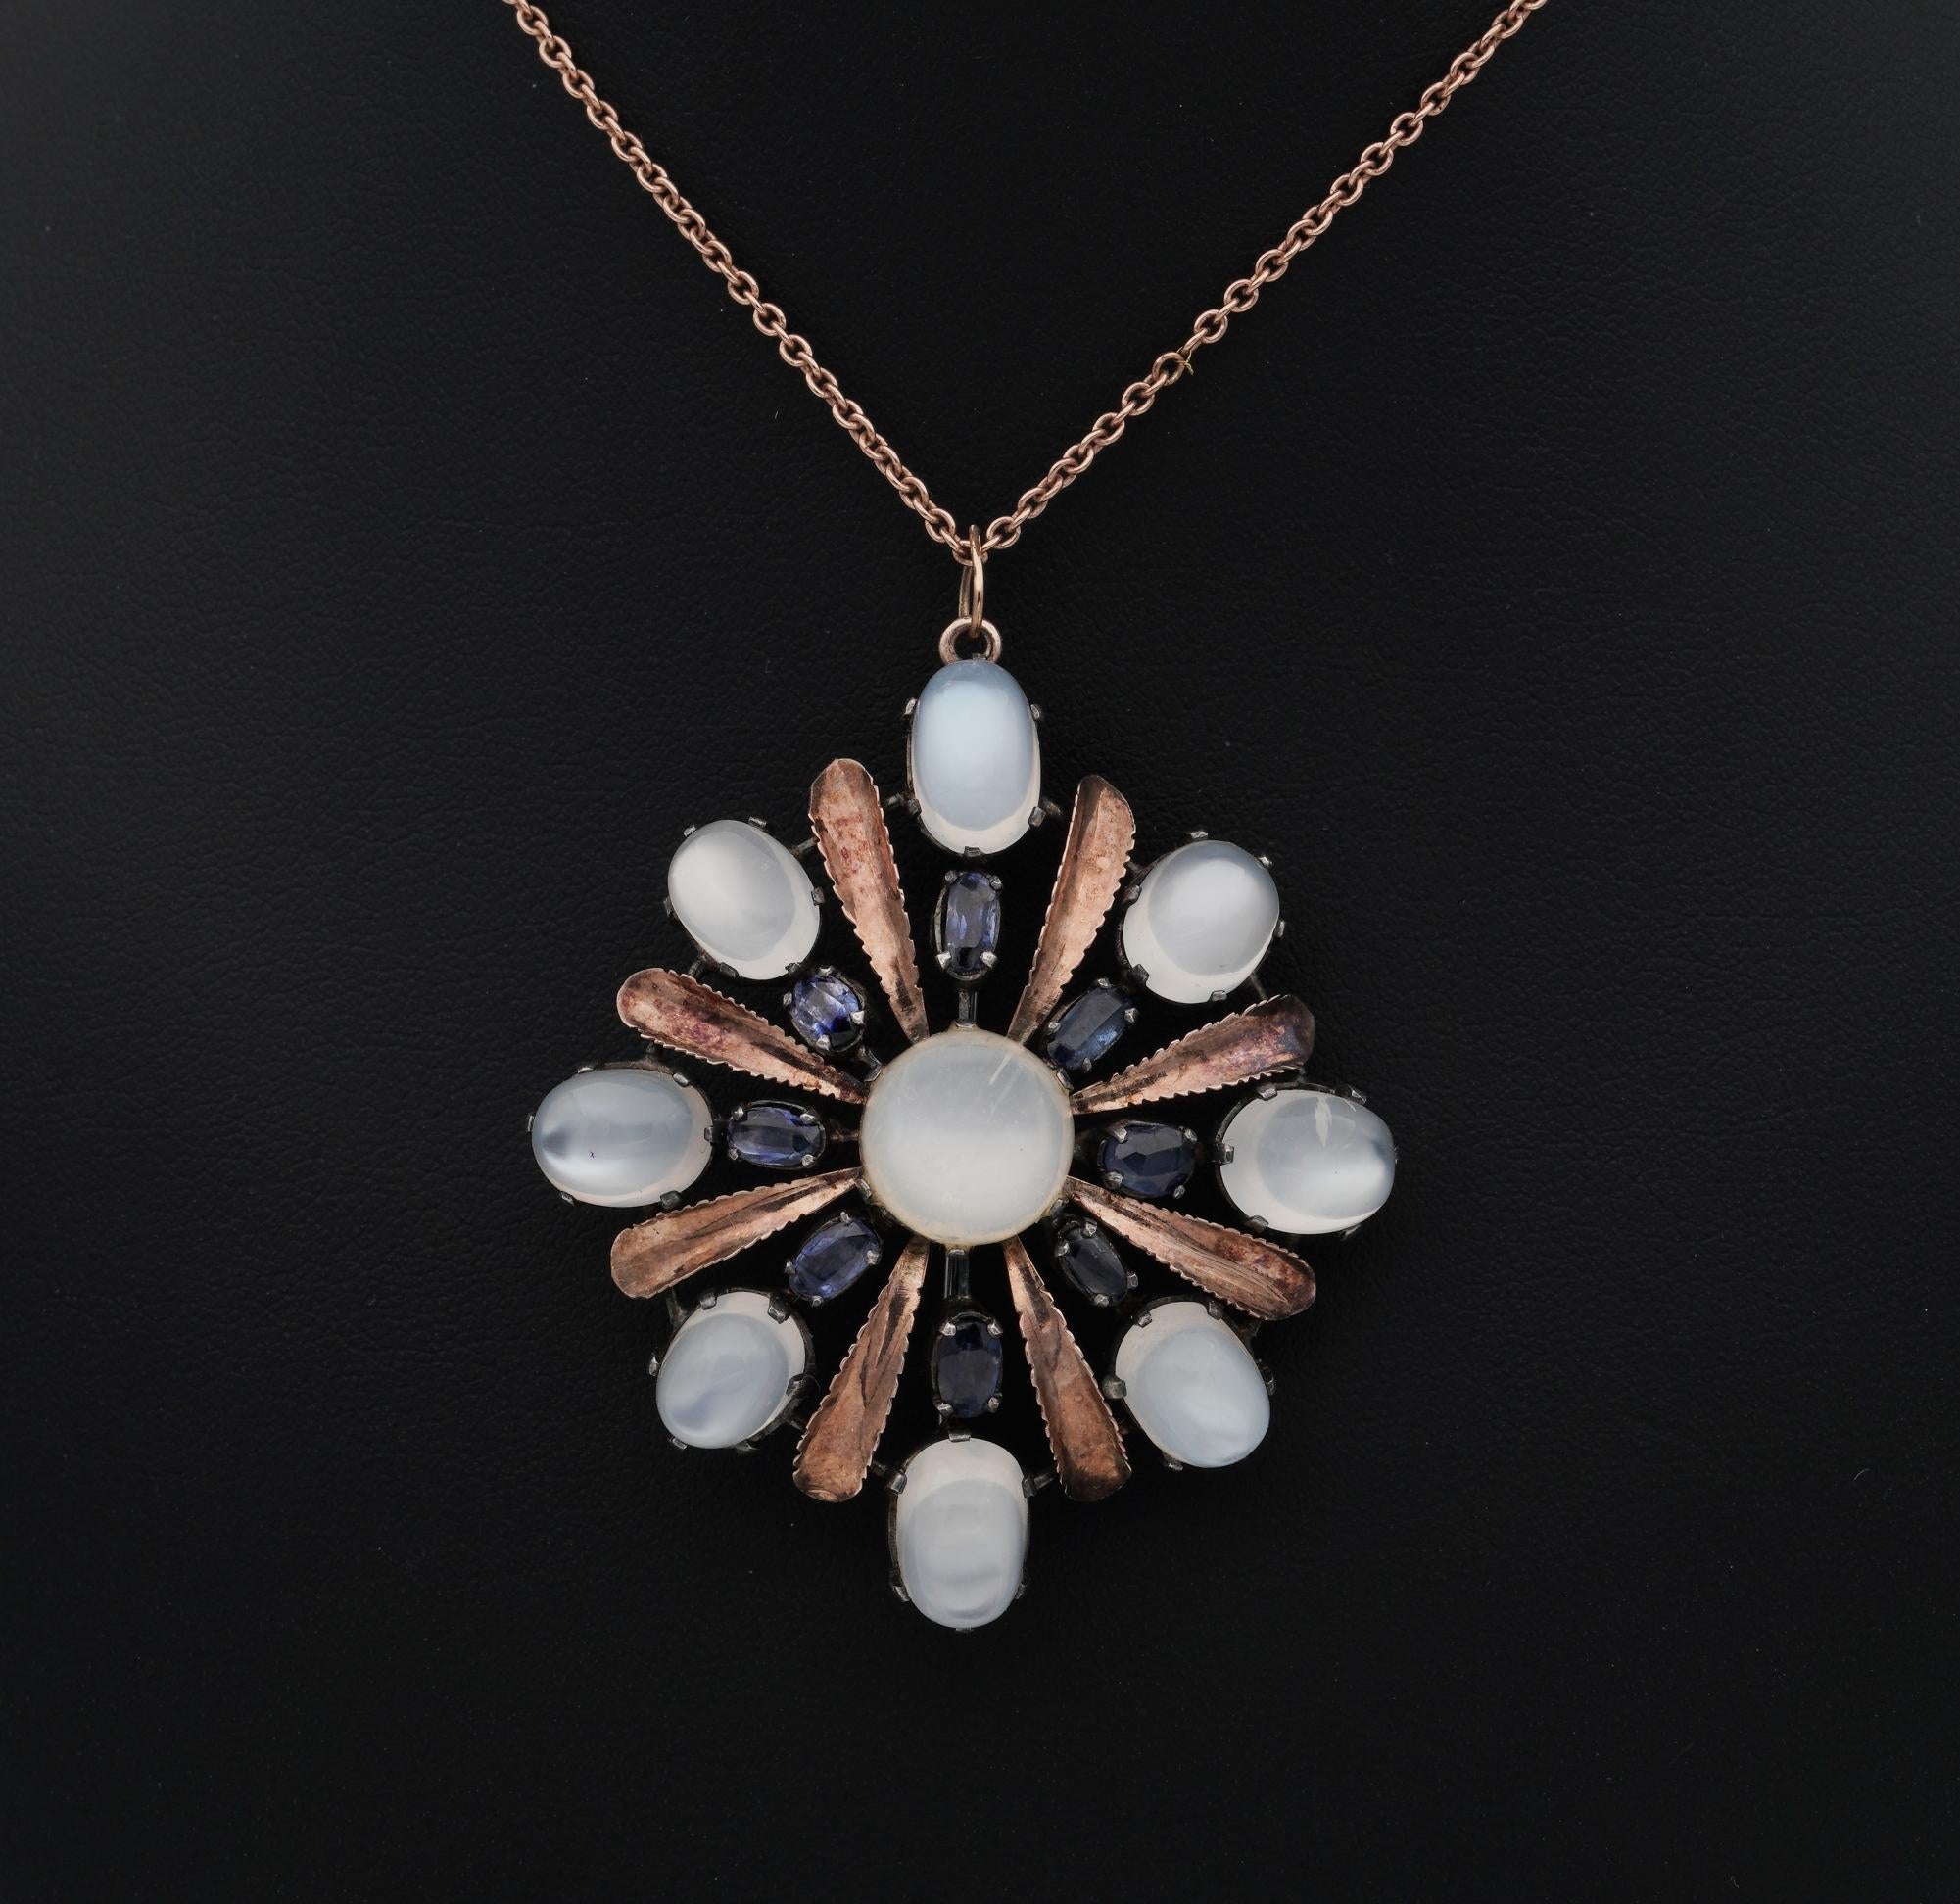 Mesmerizing Moonstones

Arts & Crafts large pendant brooch crafted of solid silver with 9KT solid rose gold details – not marked
Fantastic stylized design looks stunning worn either as brooch or as pendant as well
Crafted with fine details and